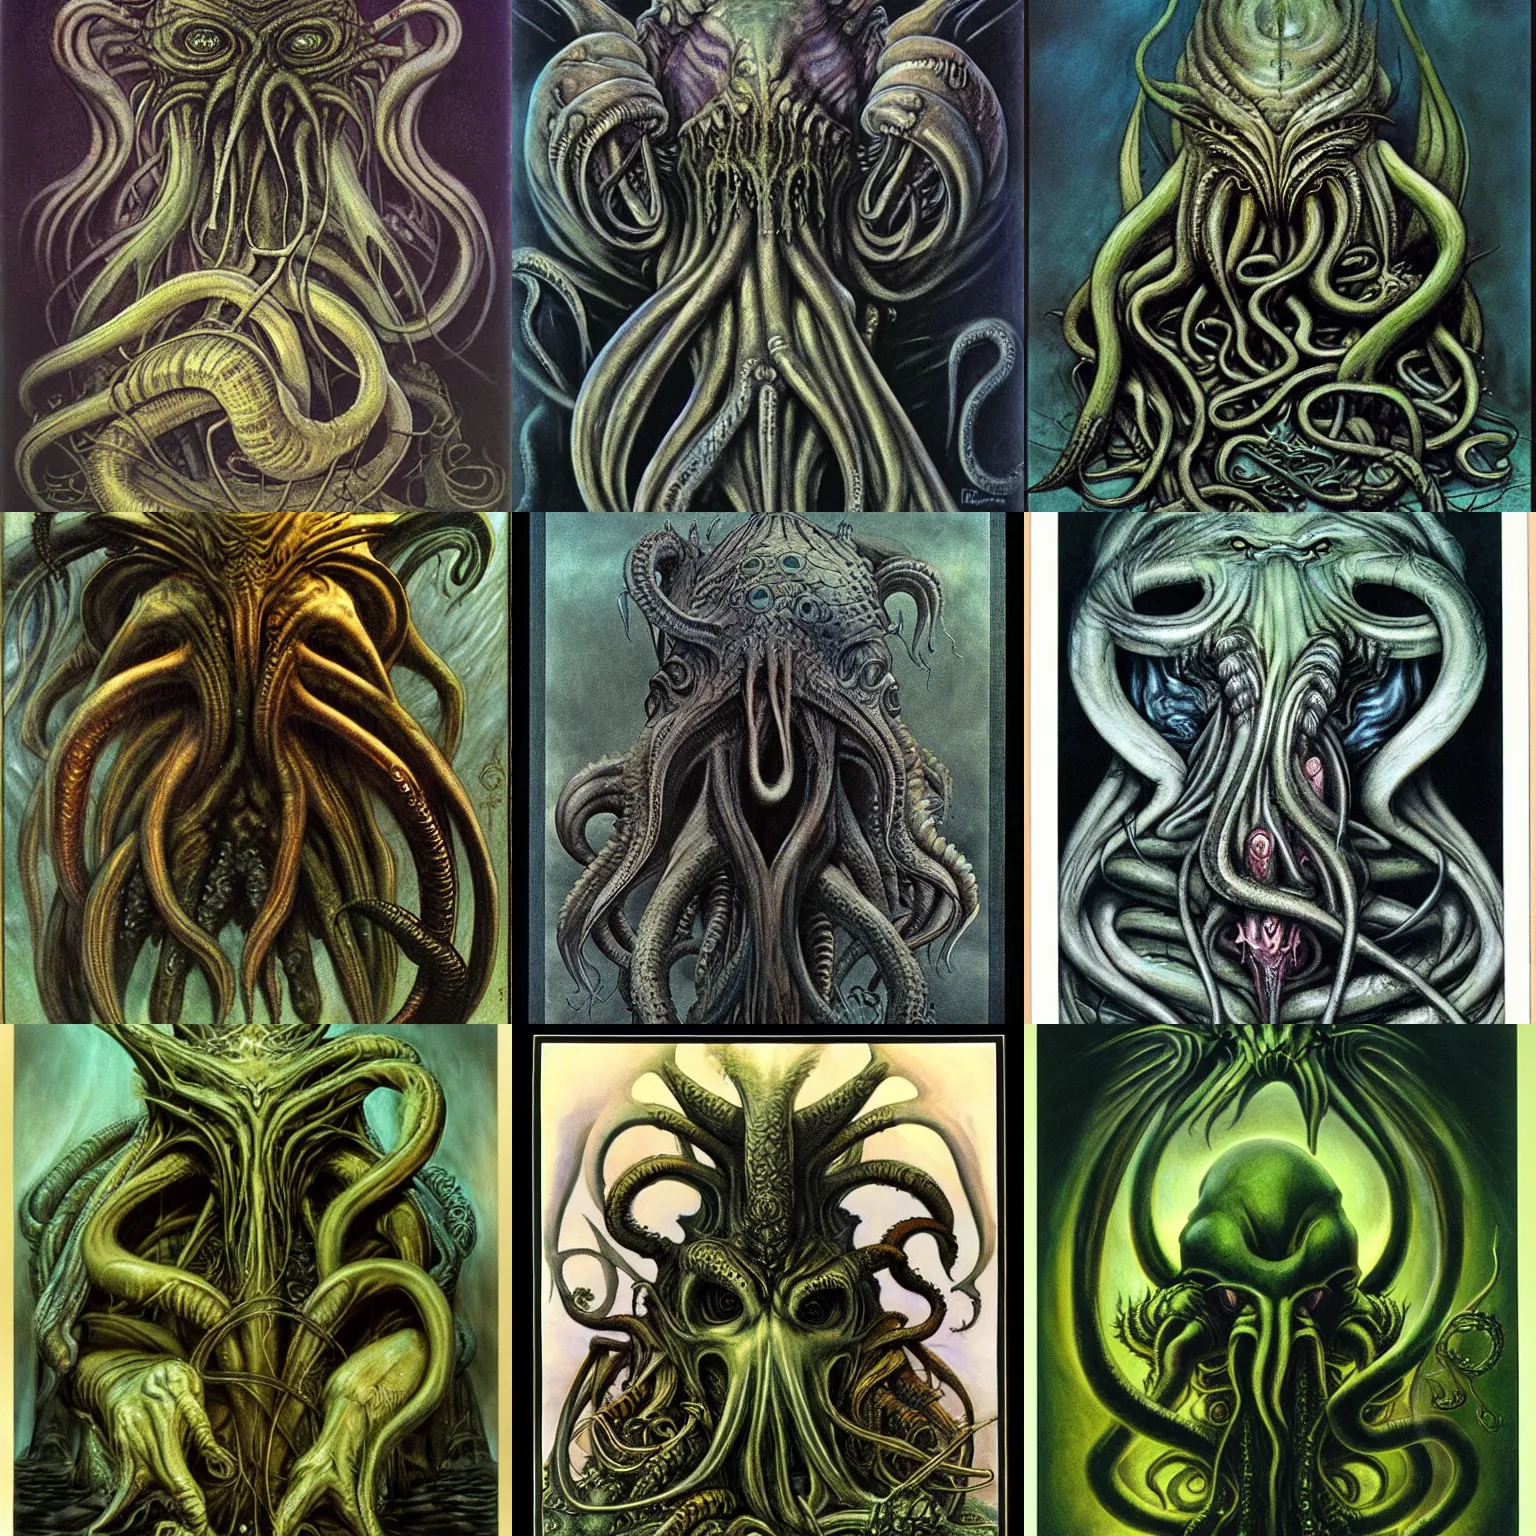 Prompt: Cthulhu by H R Giger and Brian Froud